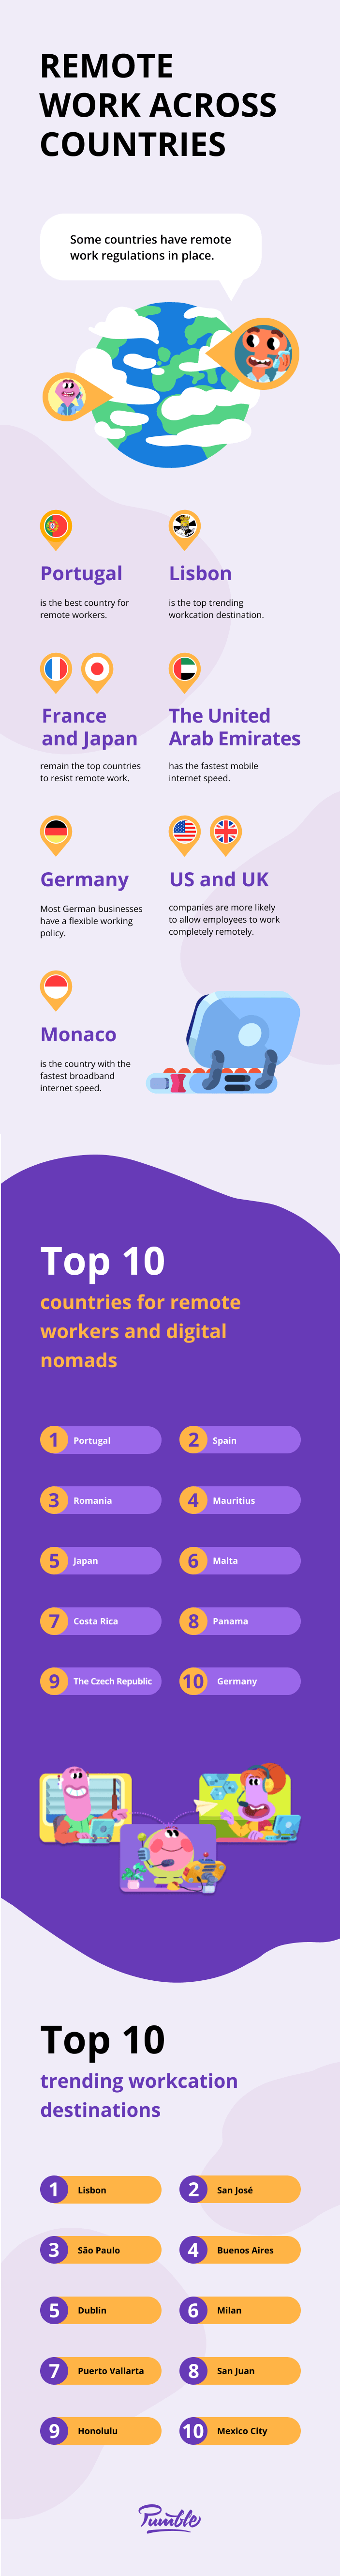 4 Remote work across countries